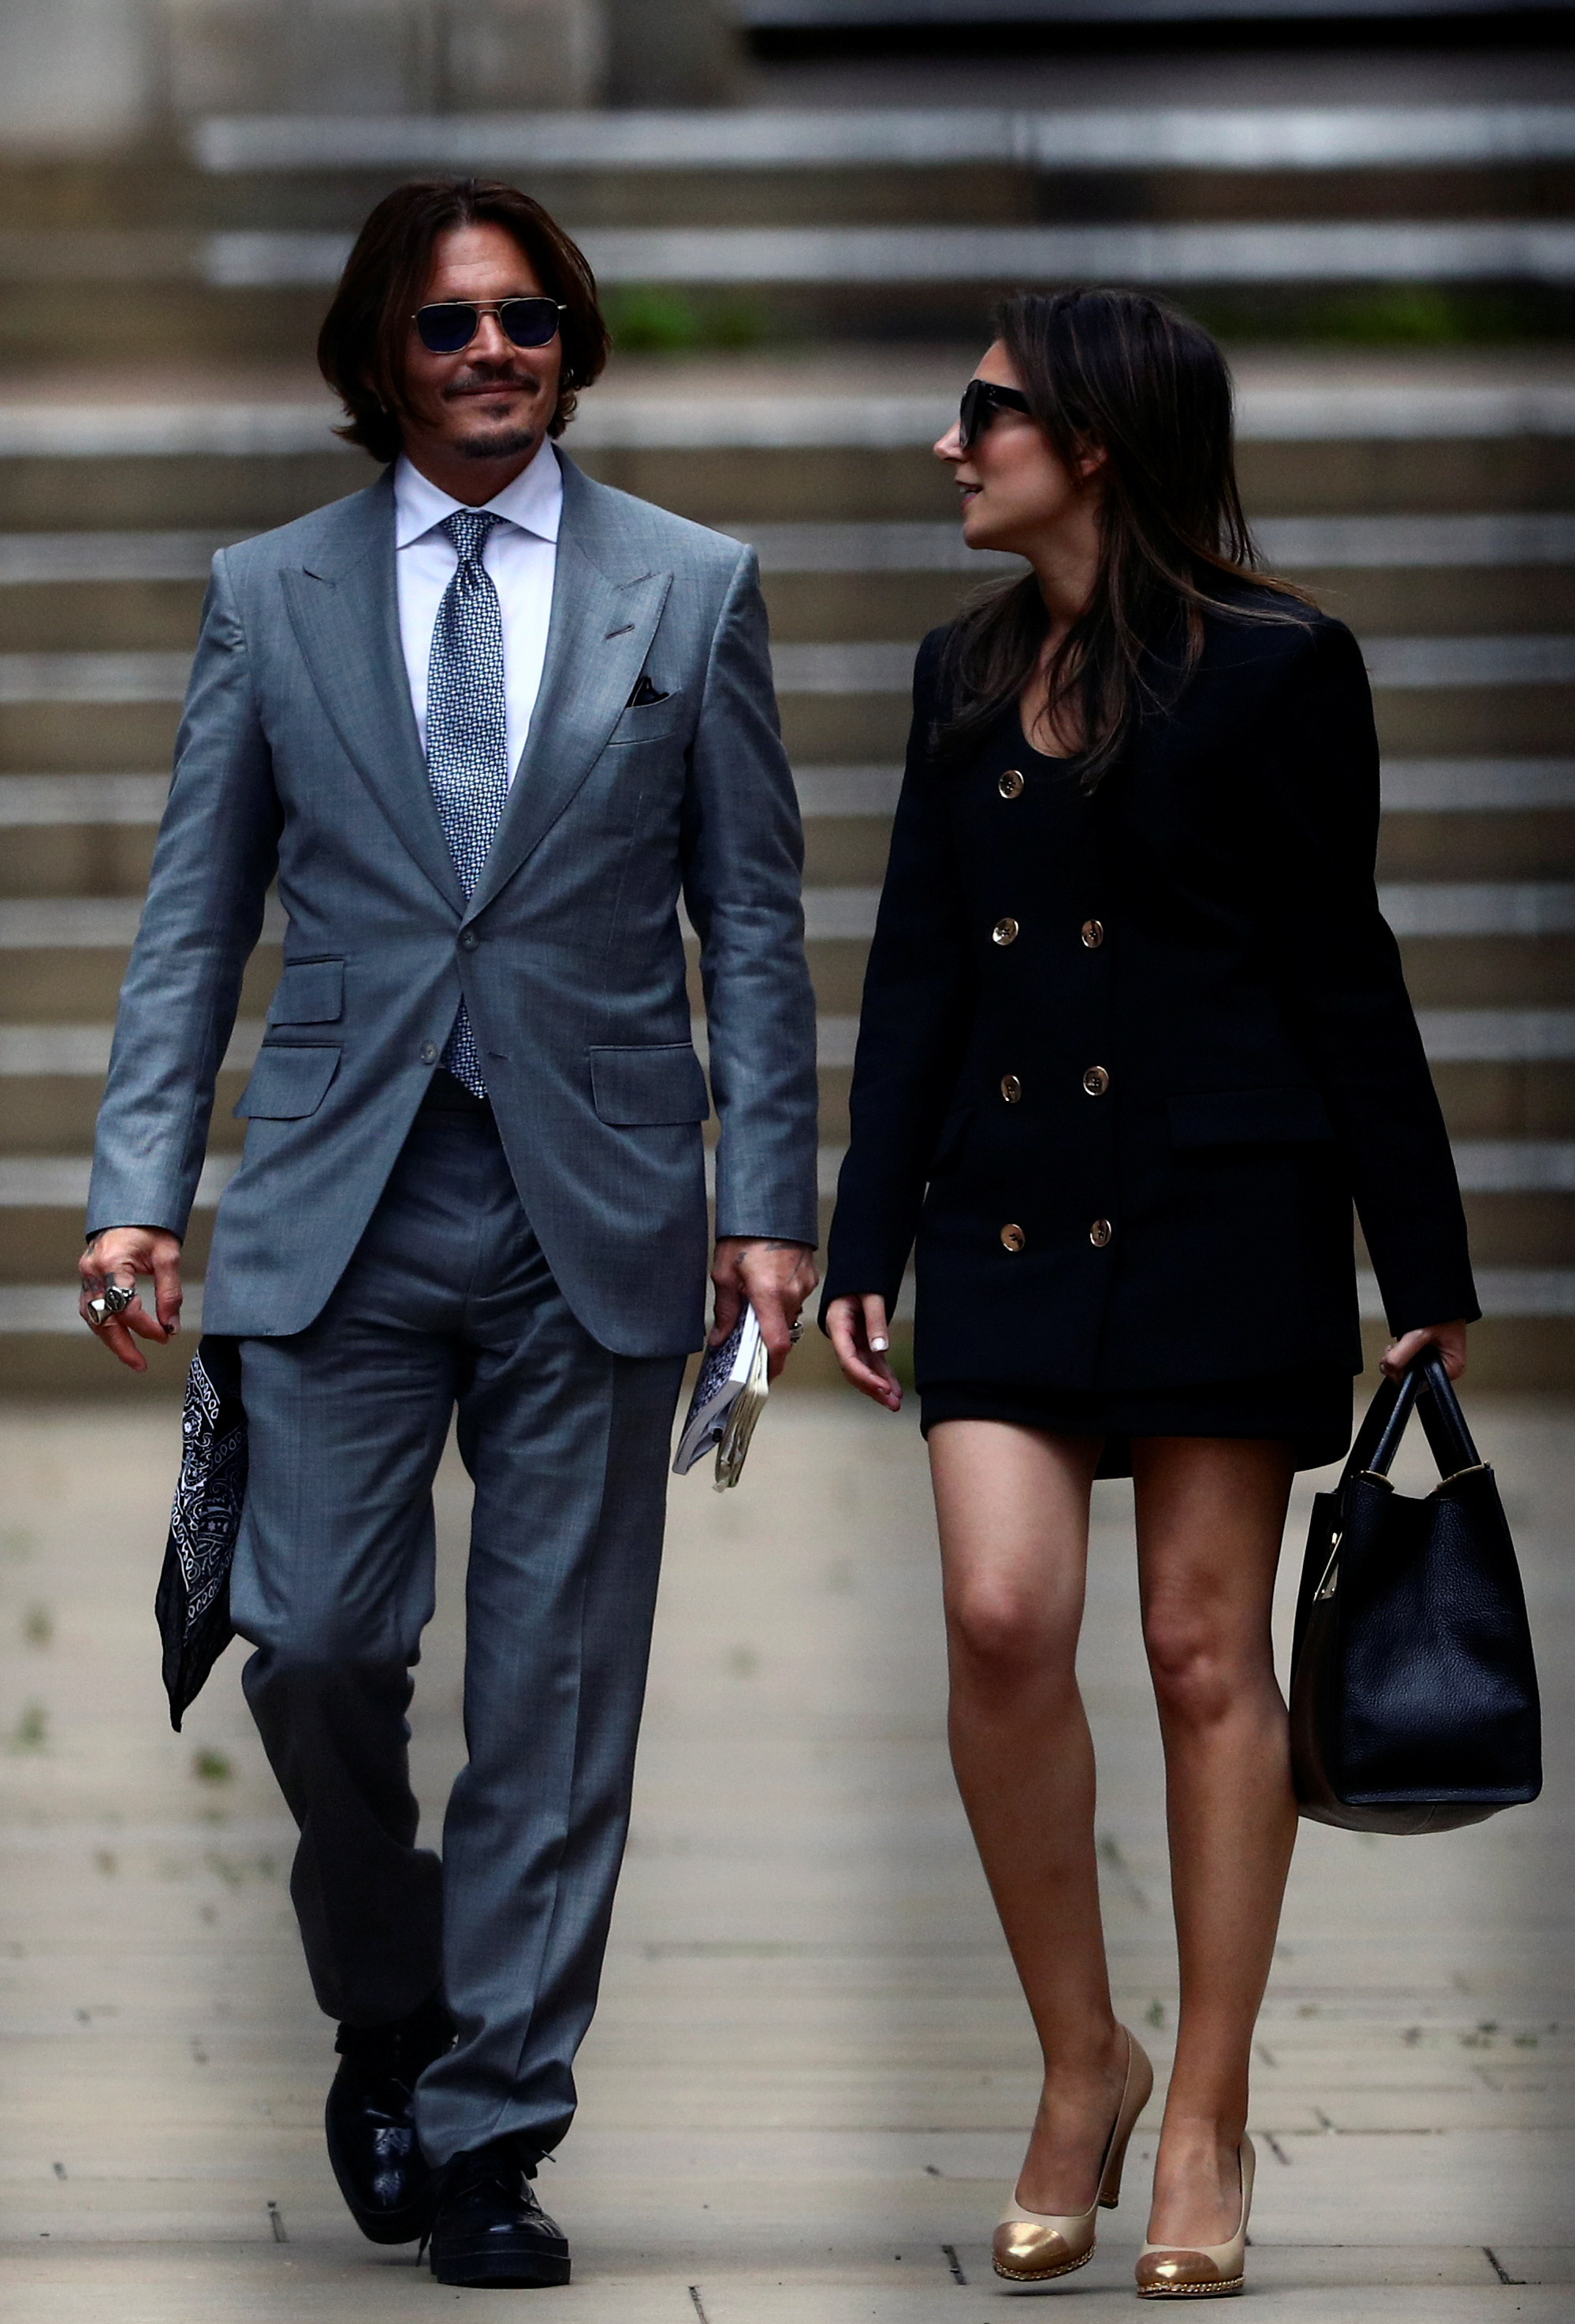 Johnny Depp with his lawyer Joelle Rich in London on trial with The Sun (Reuters)